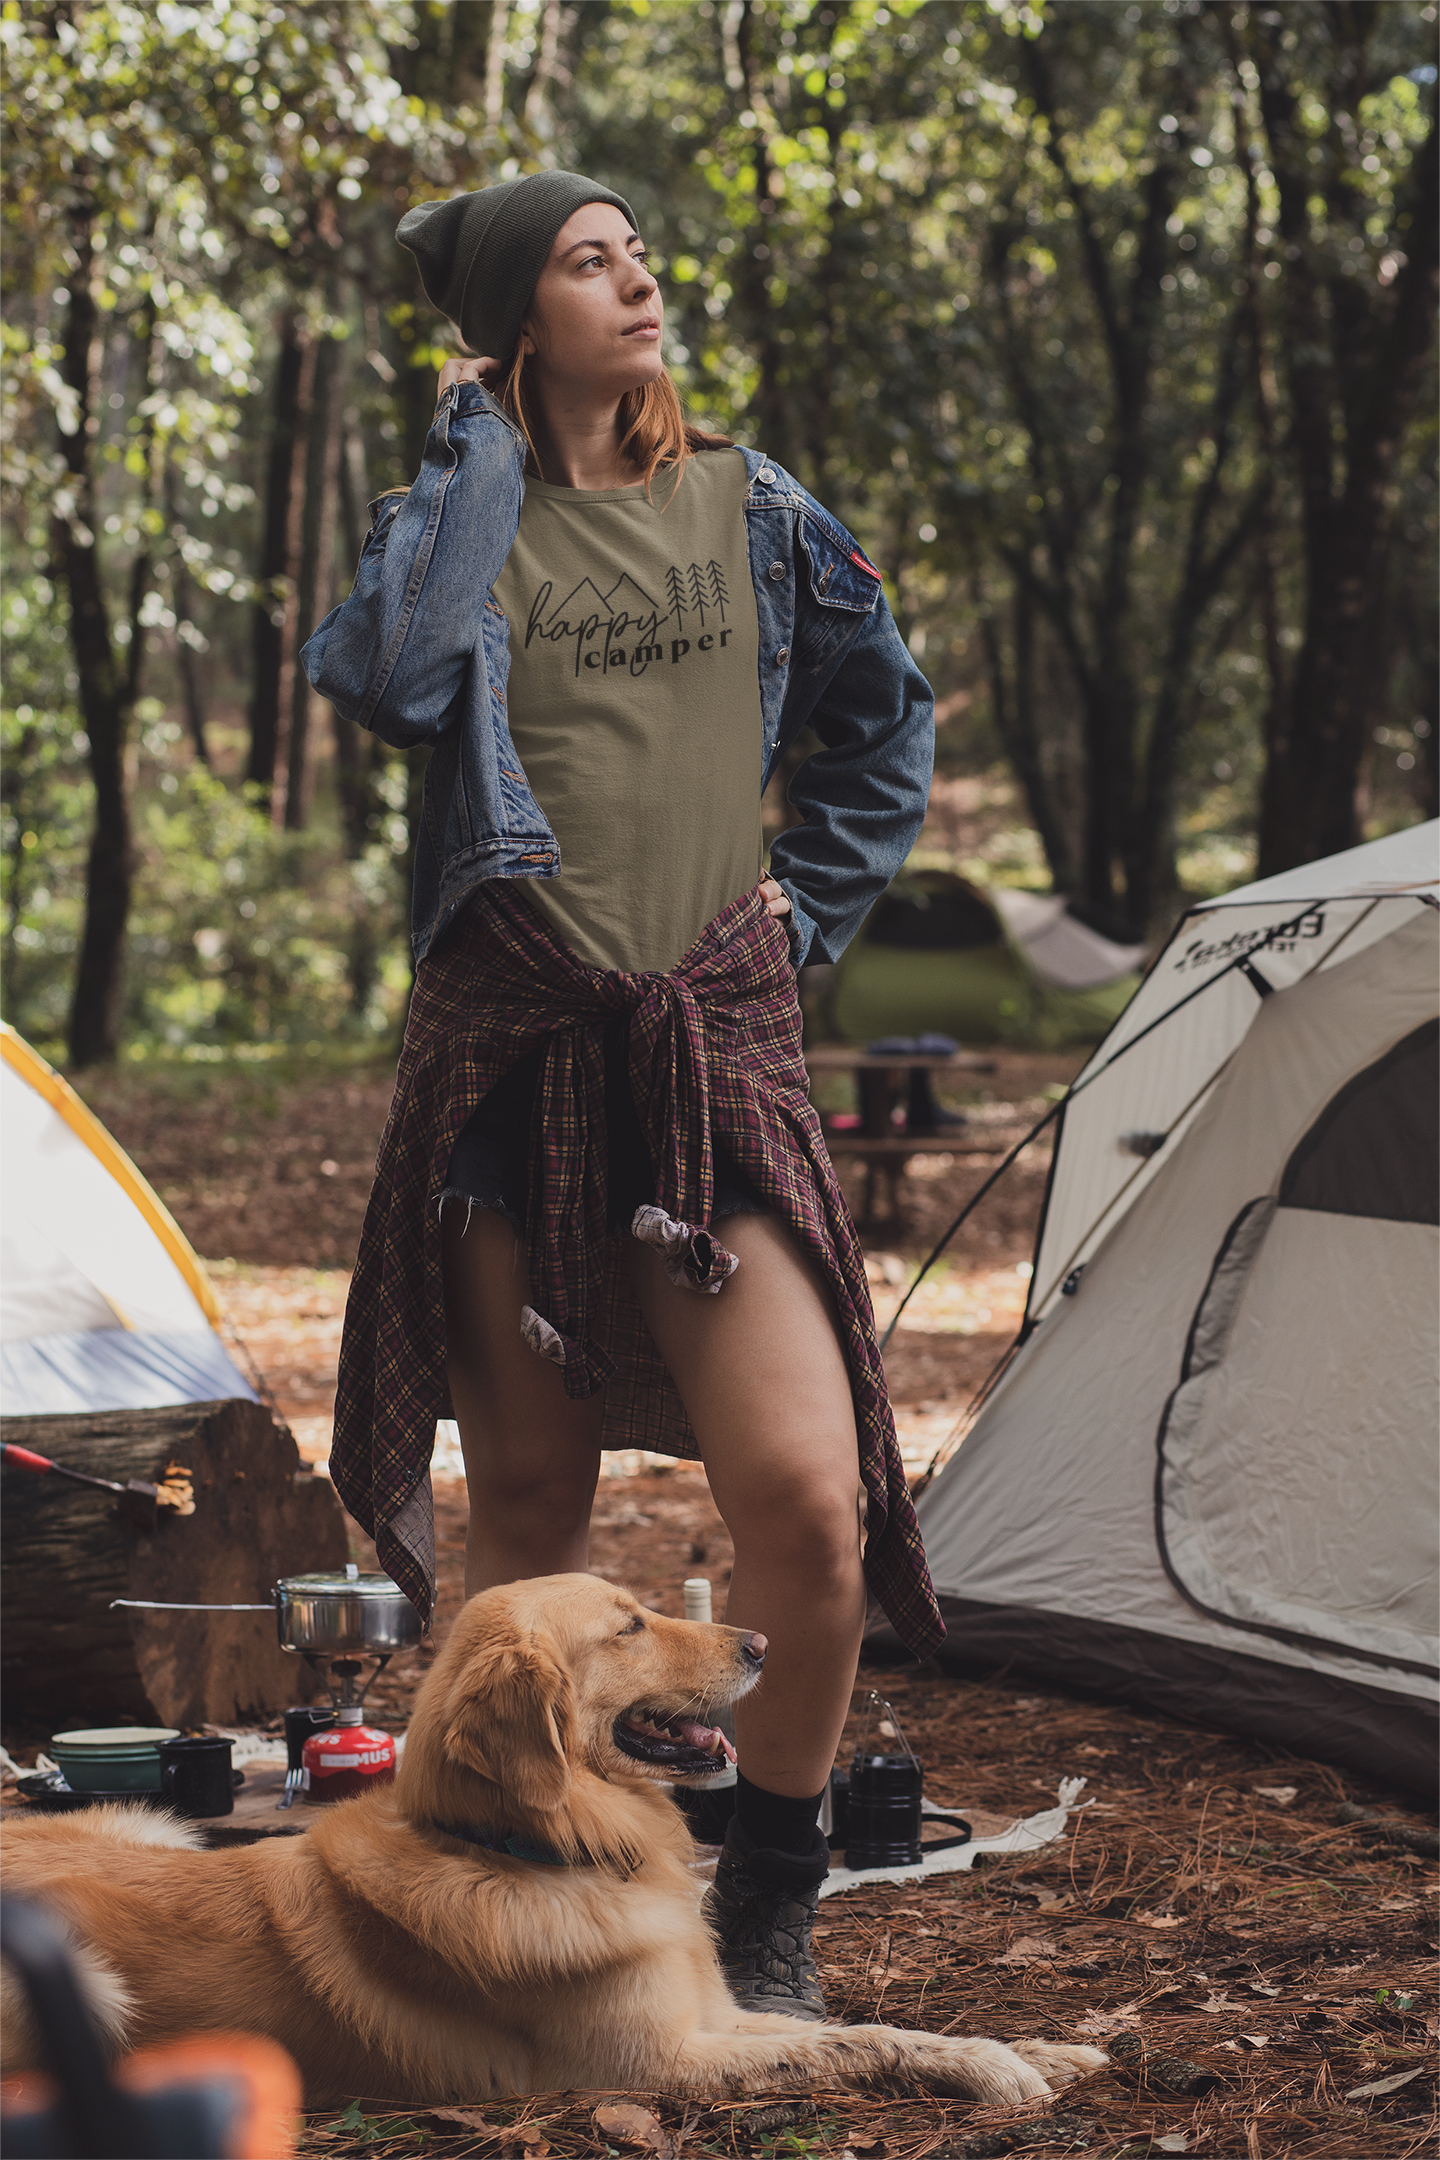 Happy Camper T-Shirt in Heather Olive. The front has a cursive font "happy" with "camper" below it in a bold lowercase font. Two triangle mountains are above the word happy, and three pine trees are above the word camper. The design is in black. This is the front view of the shirt on a female model posing looking up at the sky, with a dog in front of her legs in a woodsy area with tents beside her.